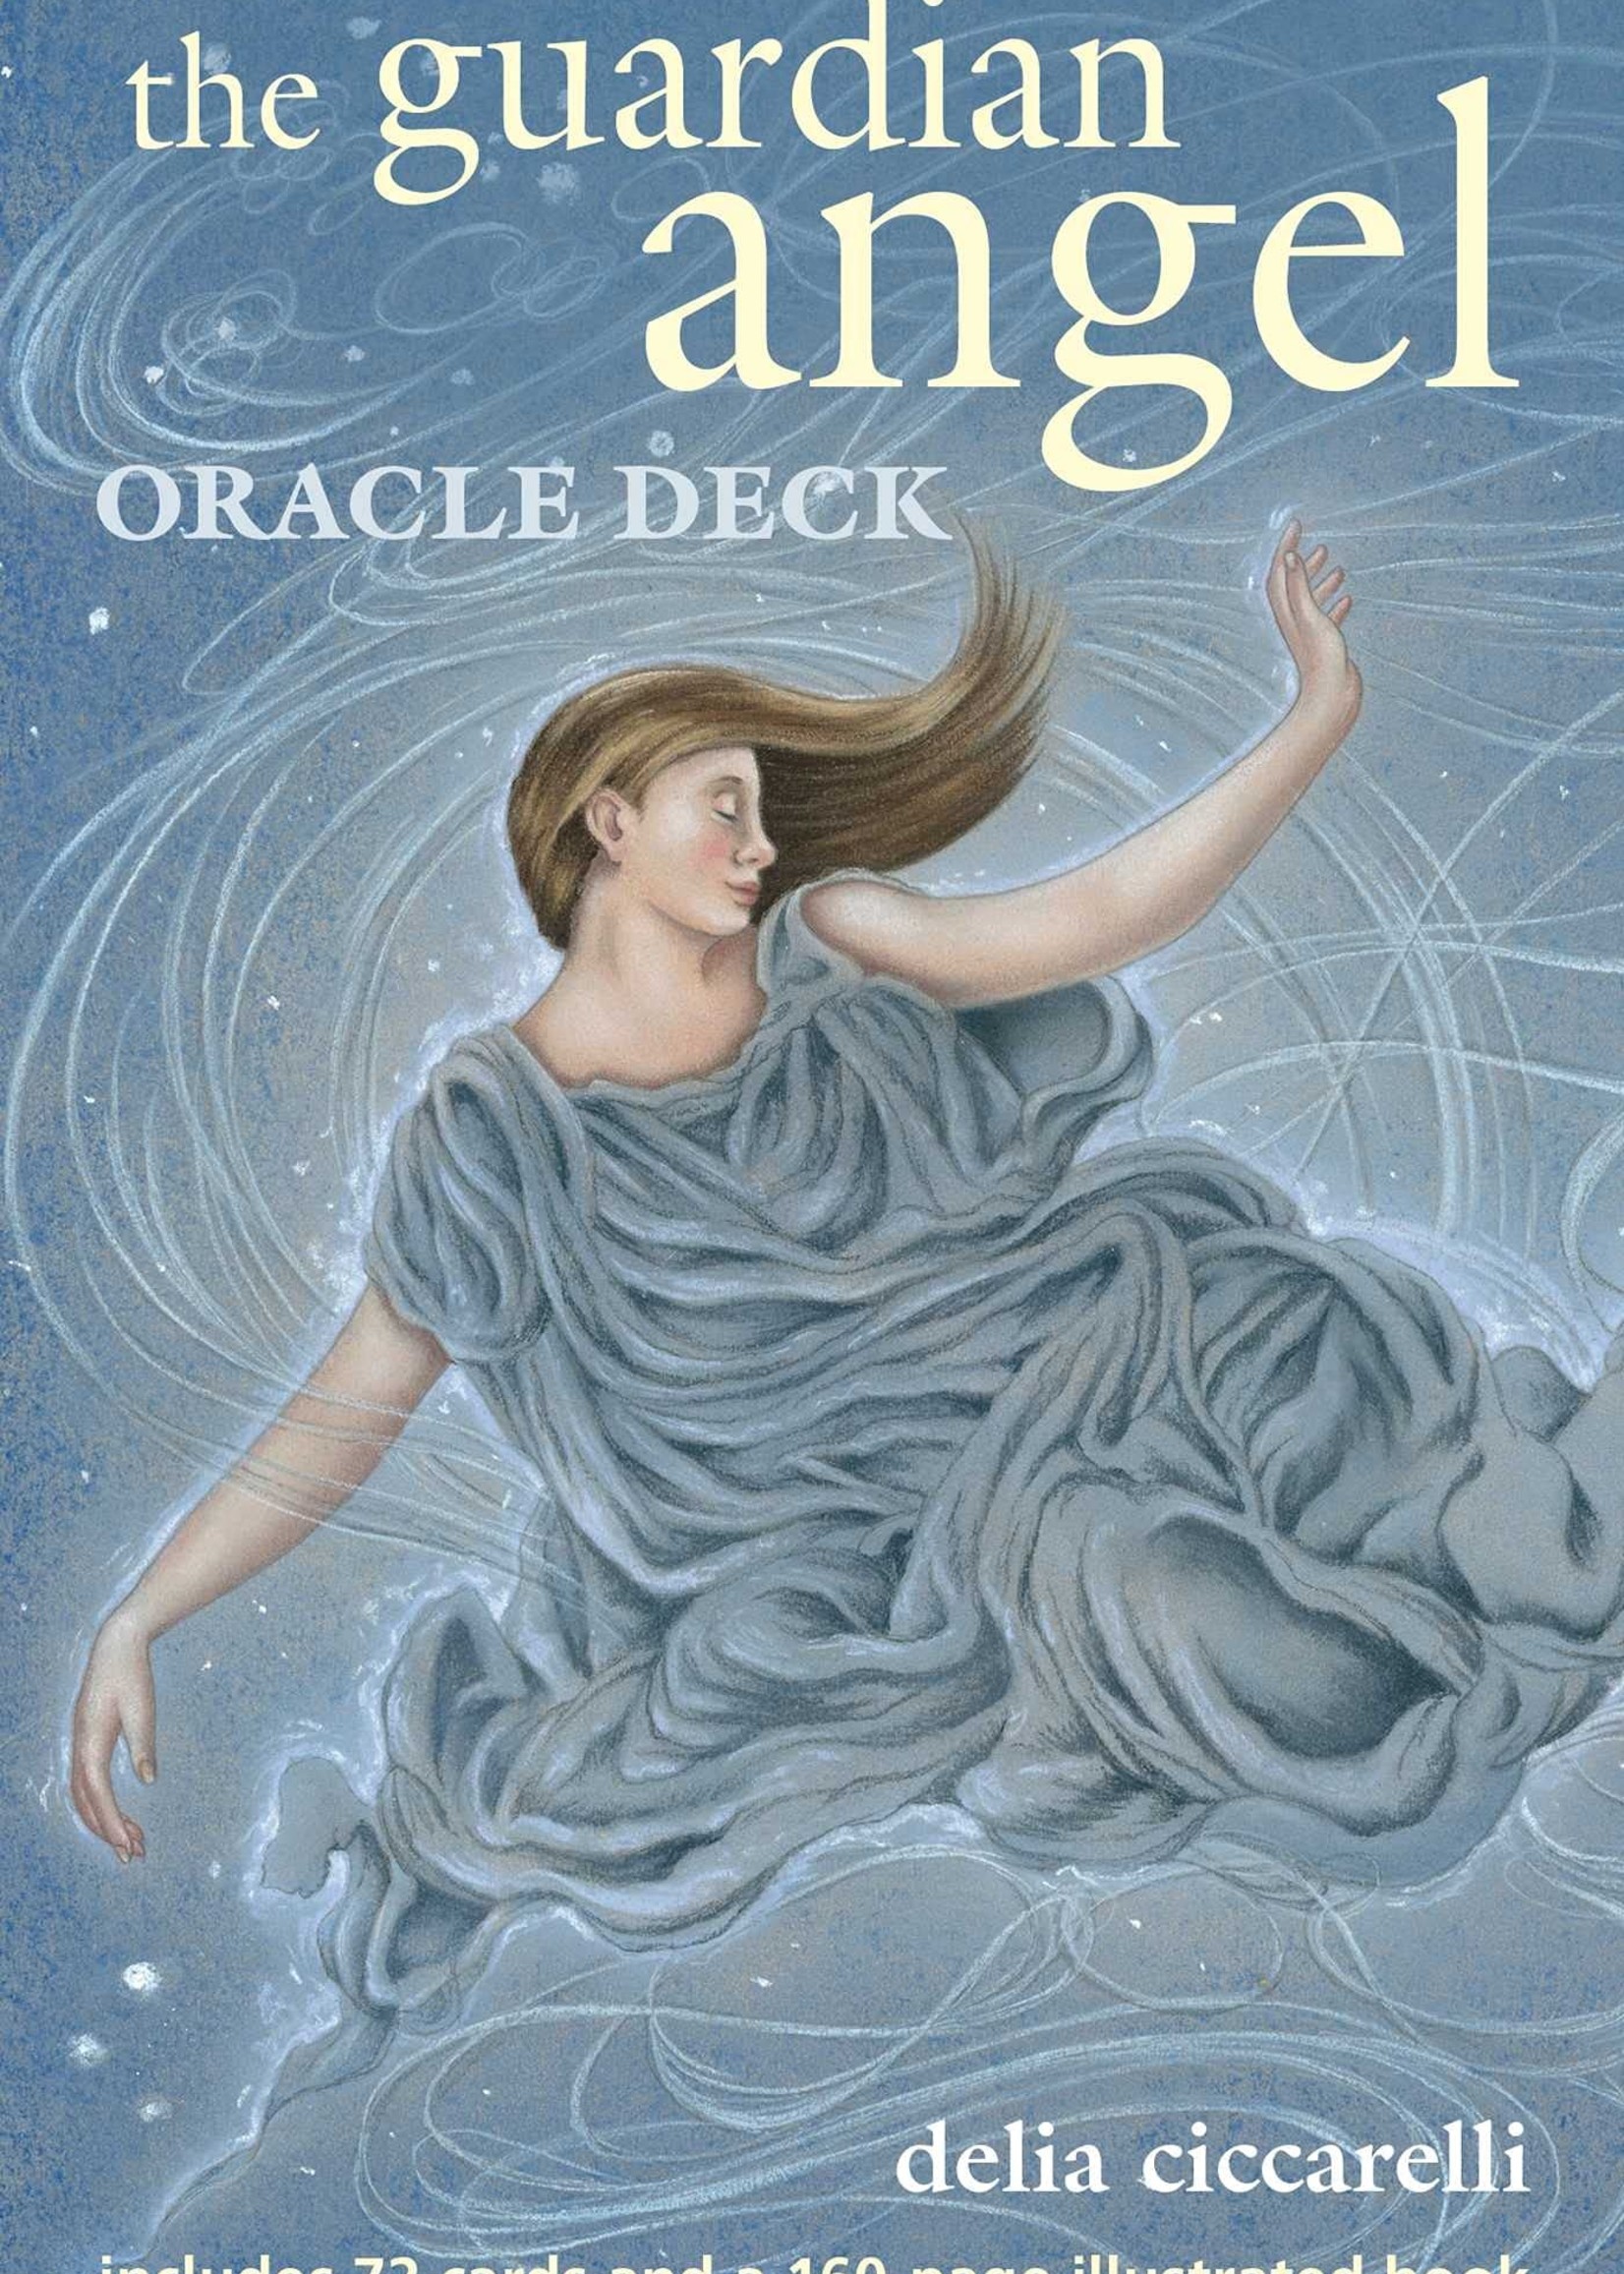 Deck The Guardian Angel Oracle